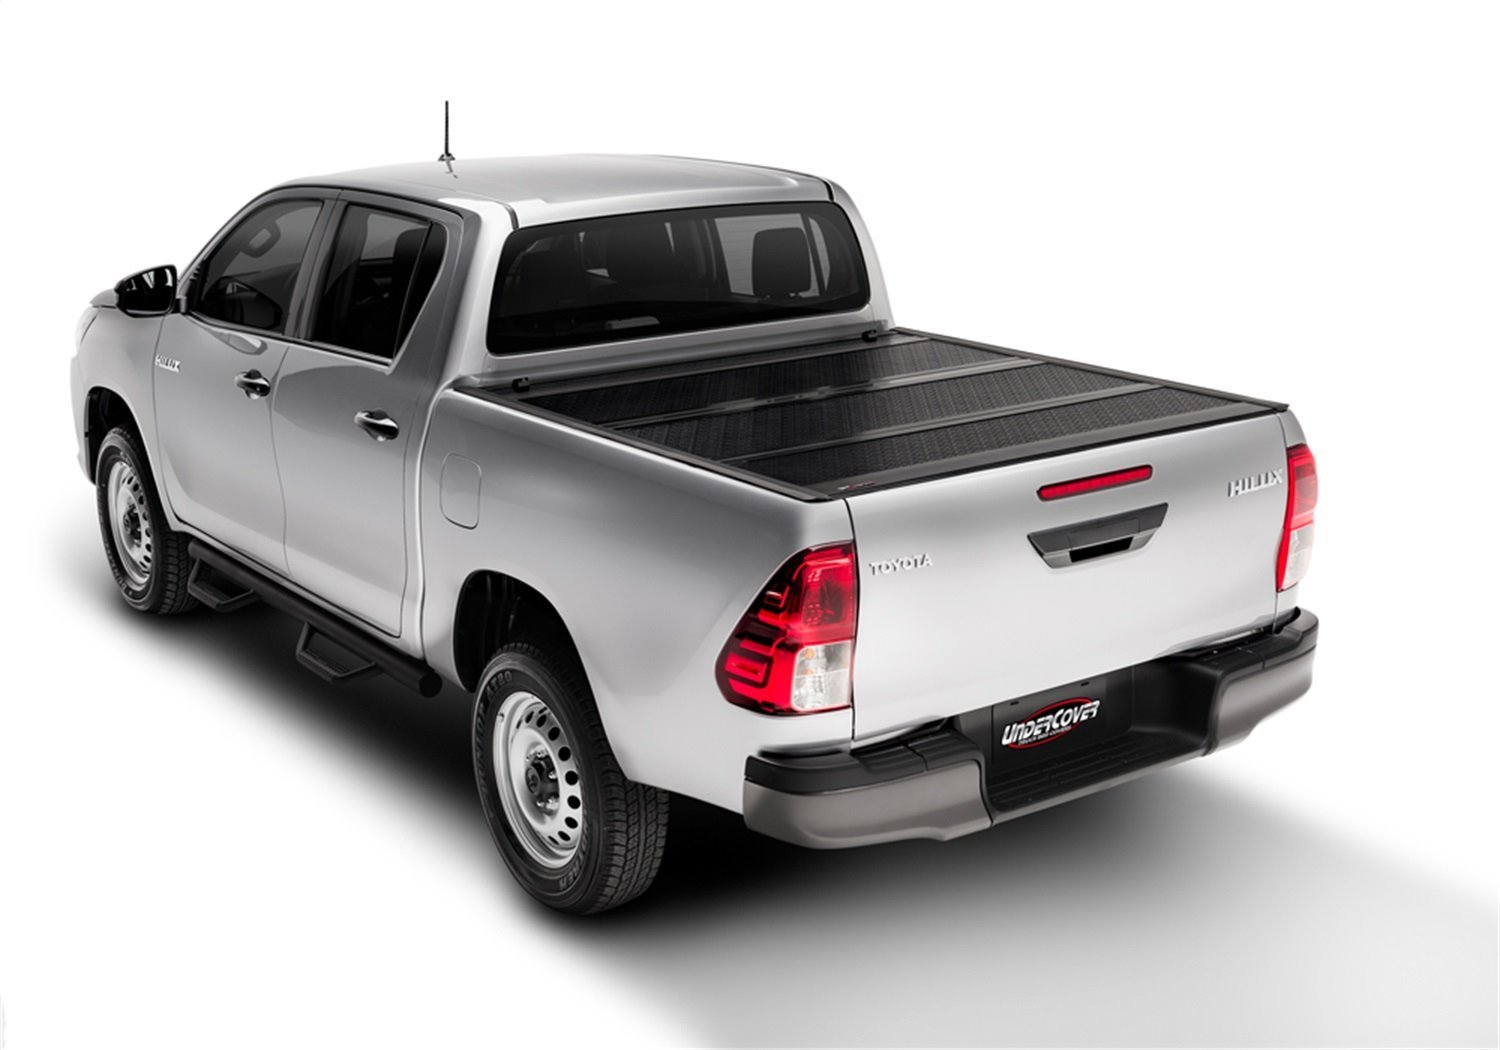 FX41015 Flex Hard Folding Cover, Fits Select Toyota Tacoma 6'Bed Crew w/o Bedside Storage Boxes, Black Textured